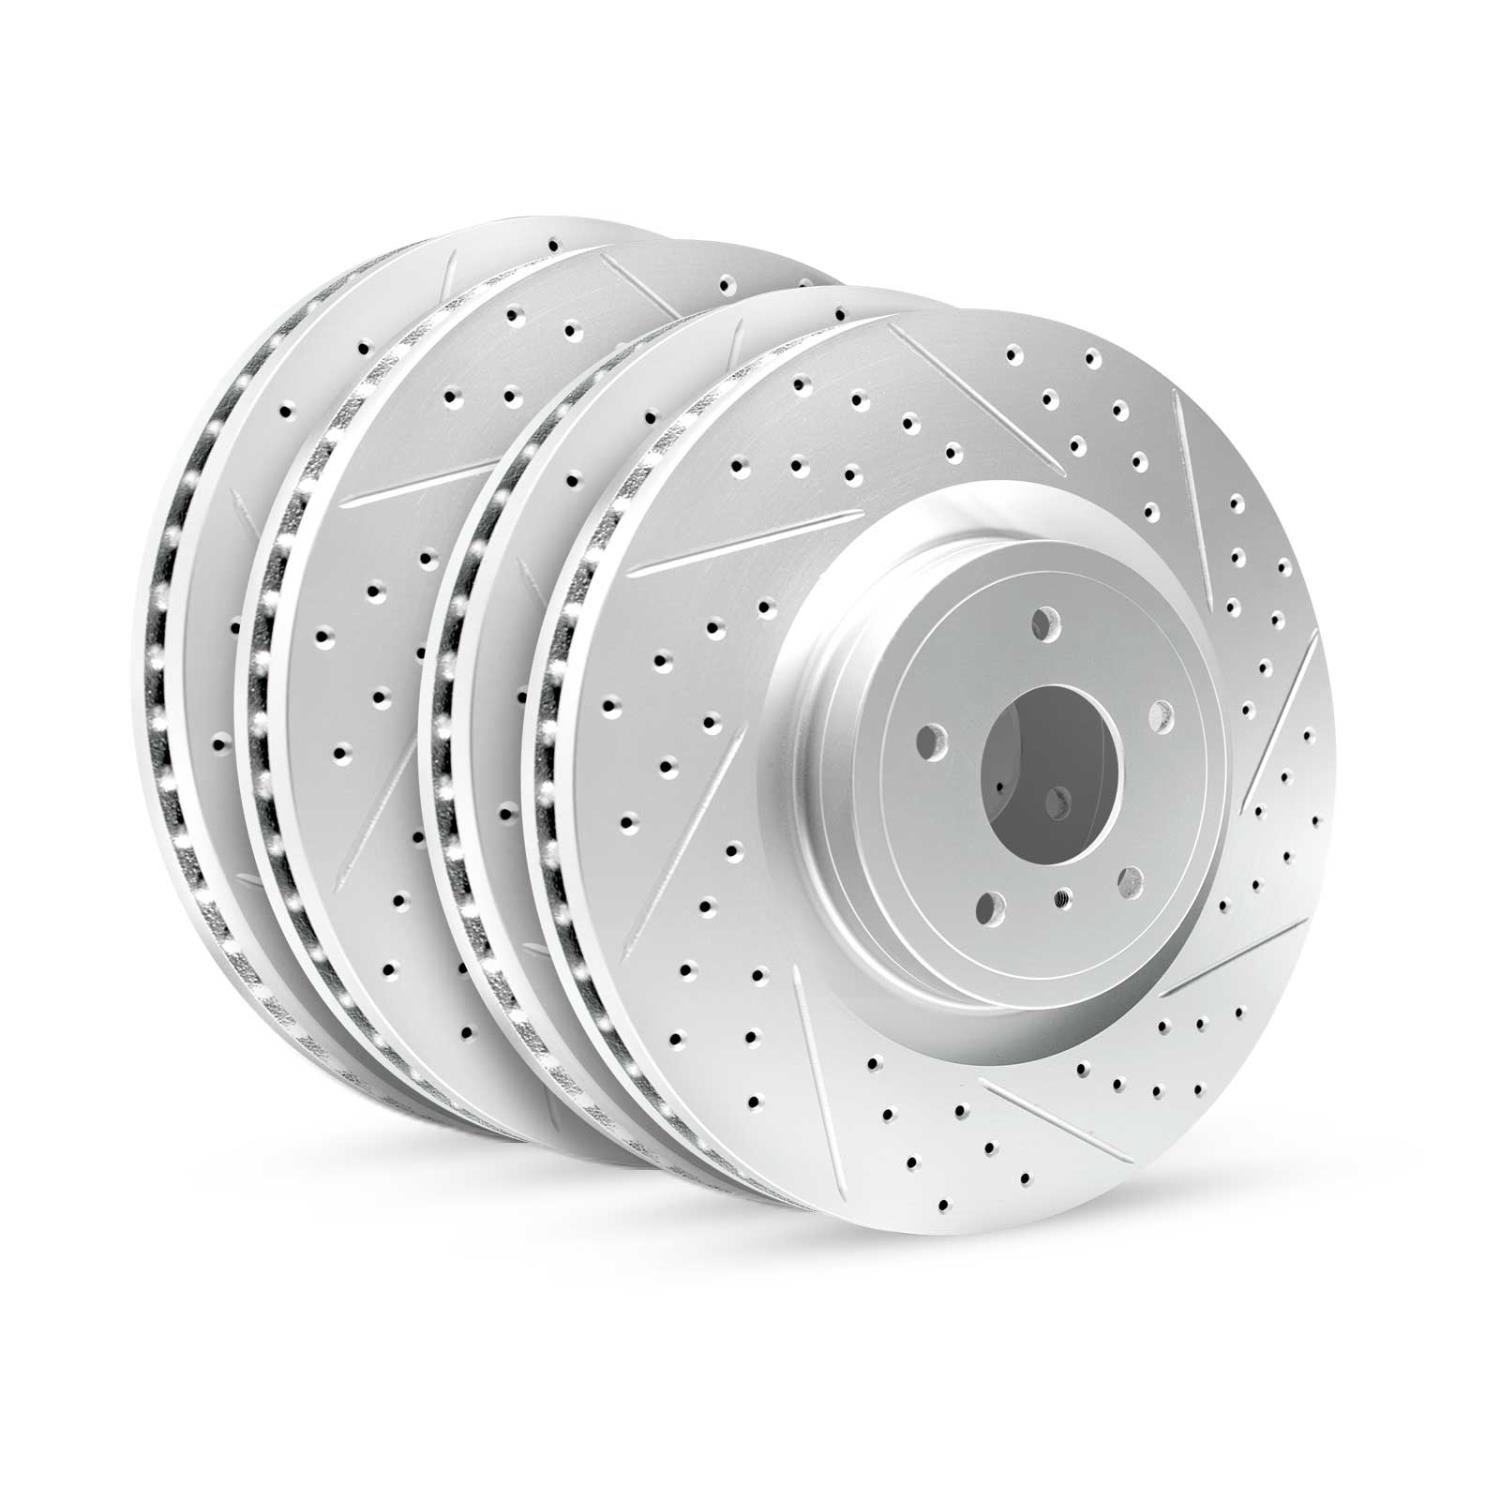 GEO-Carbon Drilled/Slotted Rotors, Fits Select Mercedes-Benz,